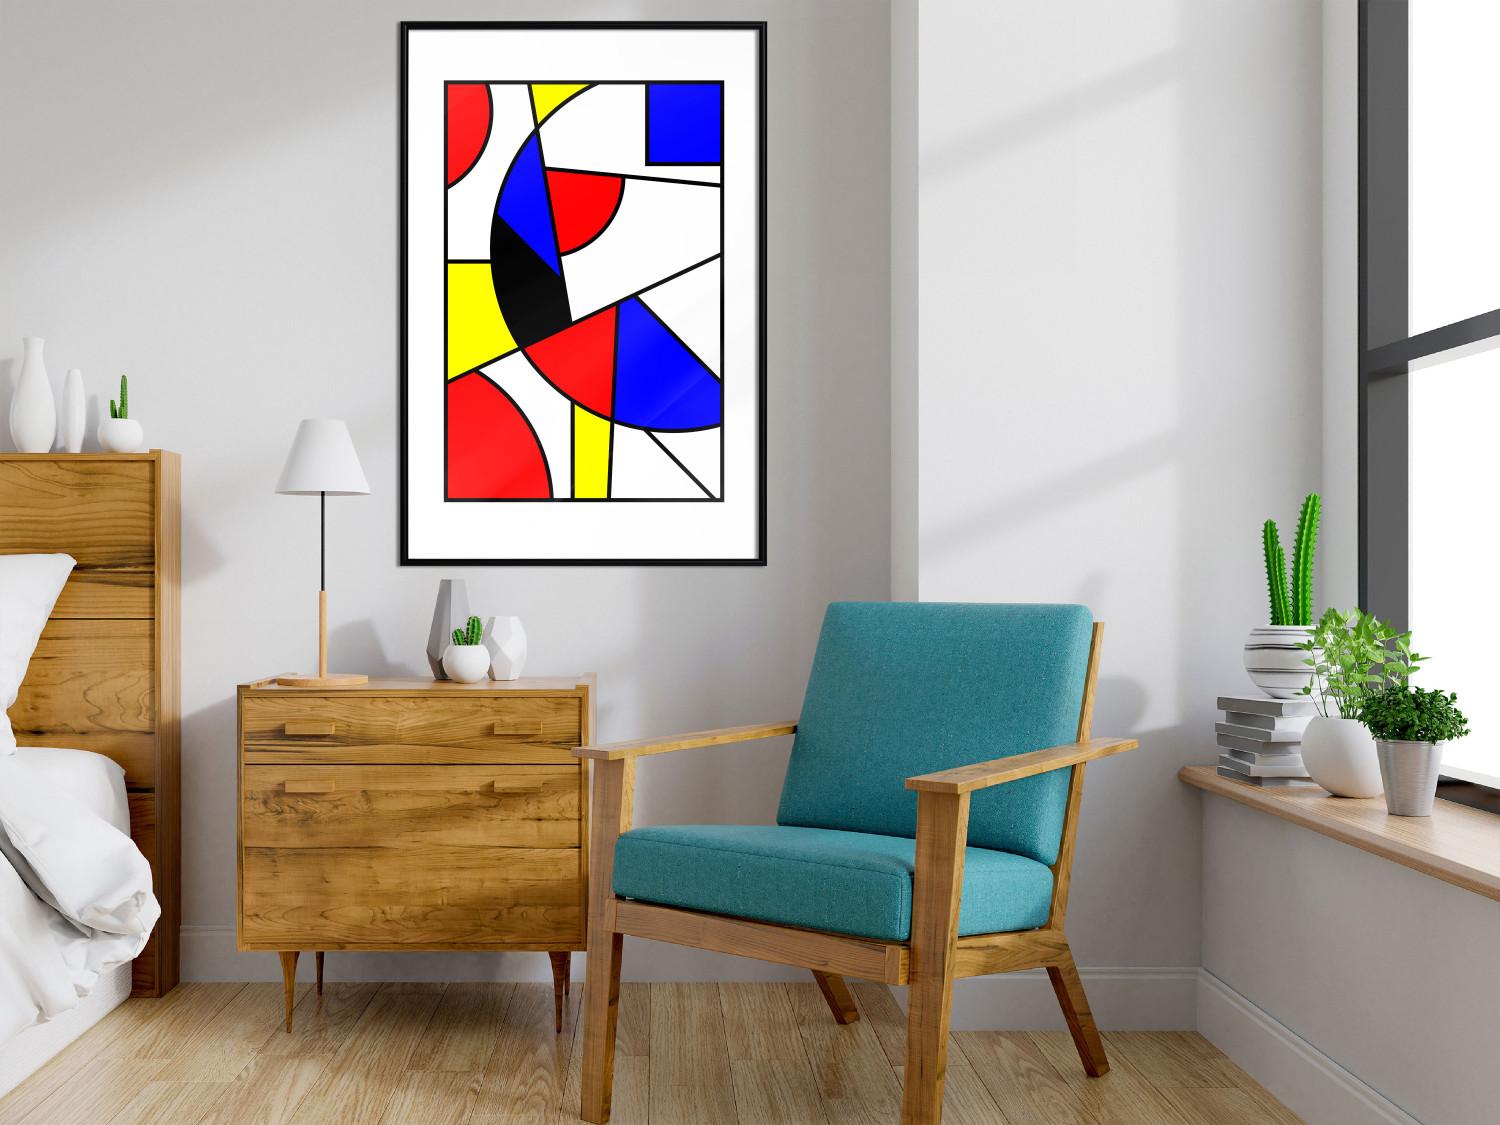 Gallery wall De Stijl Abstraction - colorful composition with geometric shapes